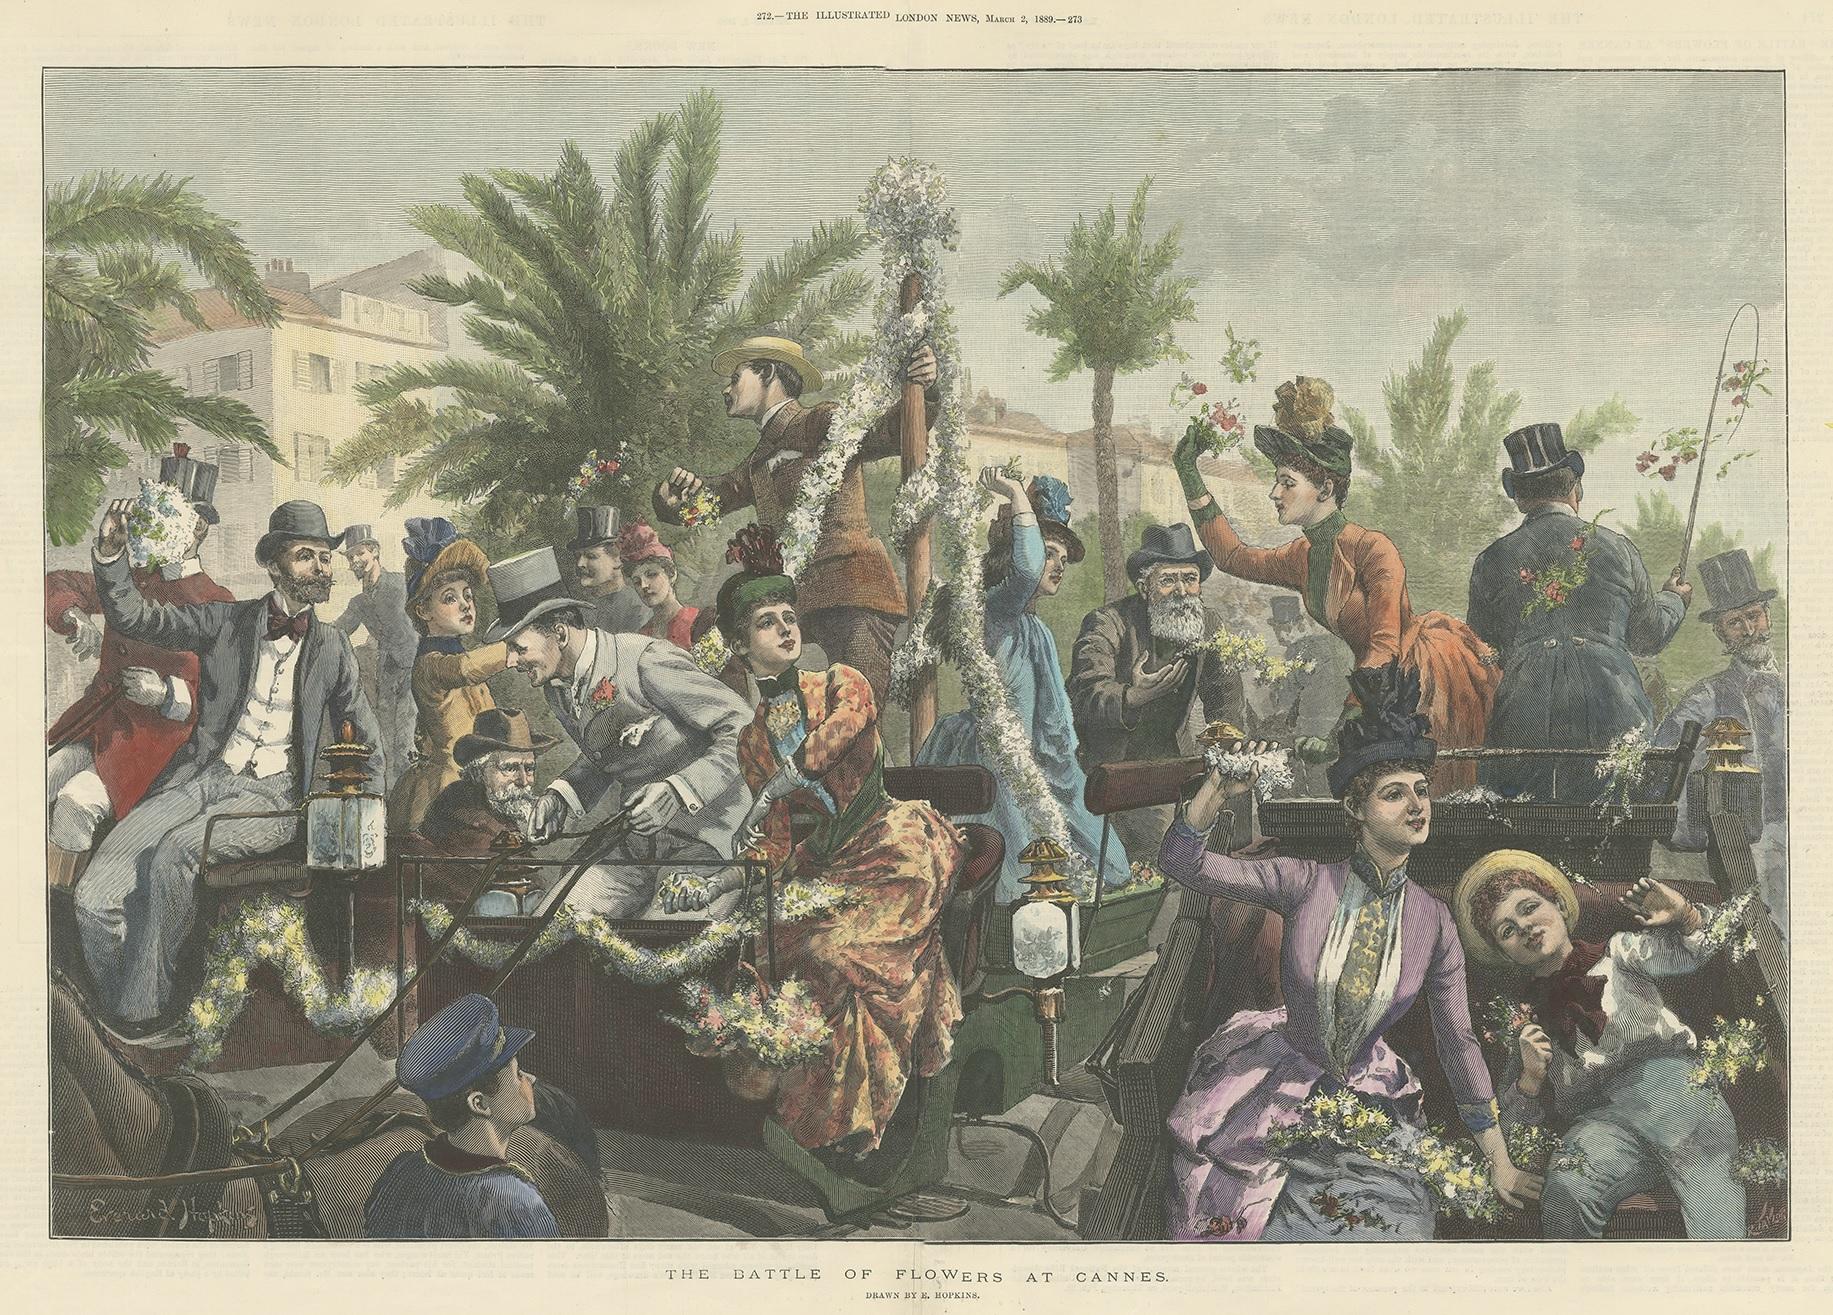 Antique print titled 'The Battle of Flowers at Cannes'. Original antique print of a flower parade in Cannes, France. This print originates from 'The Illustrated London News'. Drawn by E. Hopkins. Published March 2, 1889.